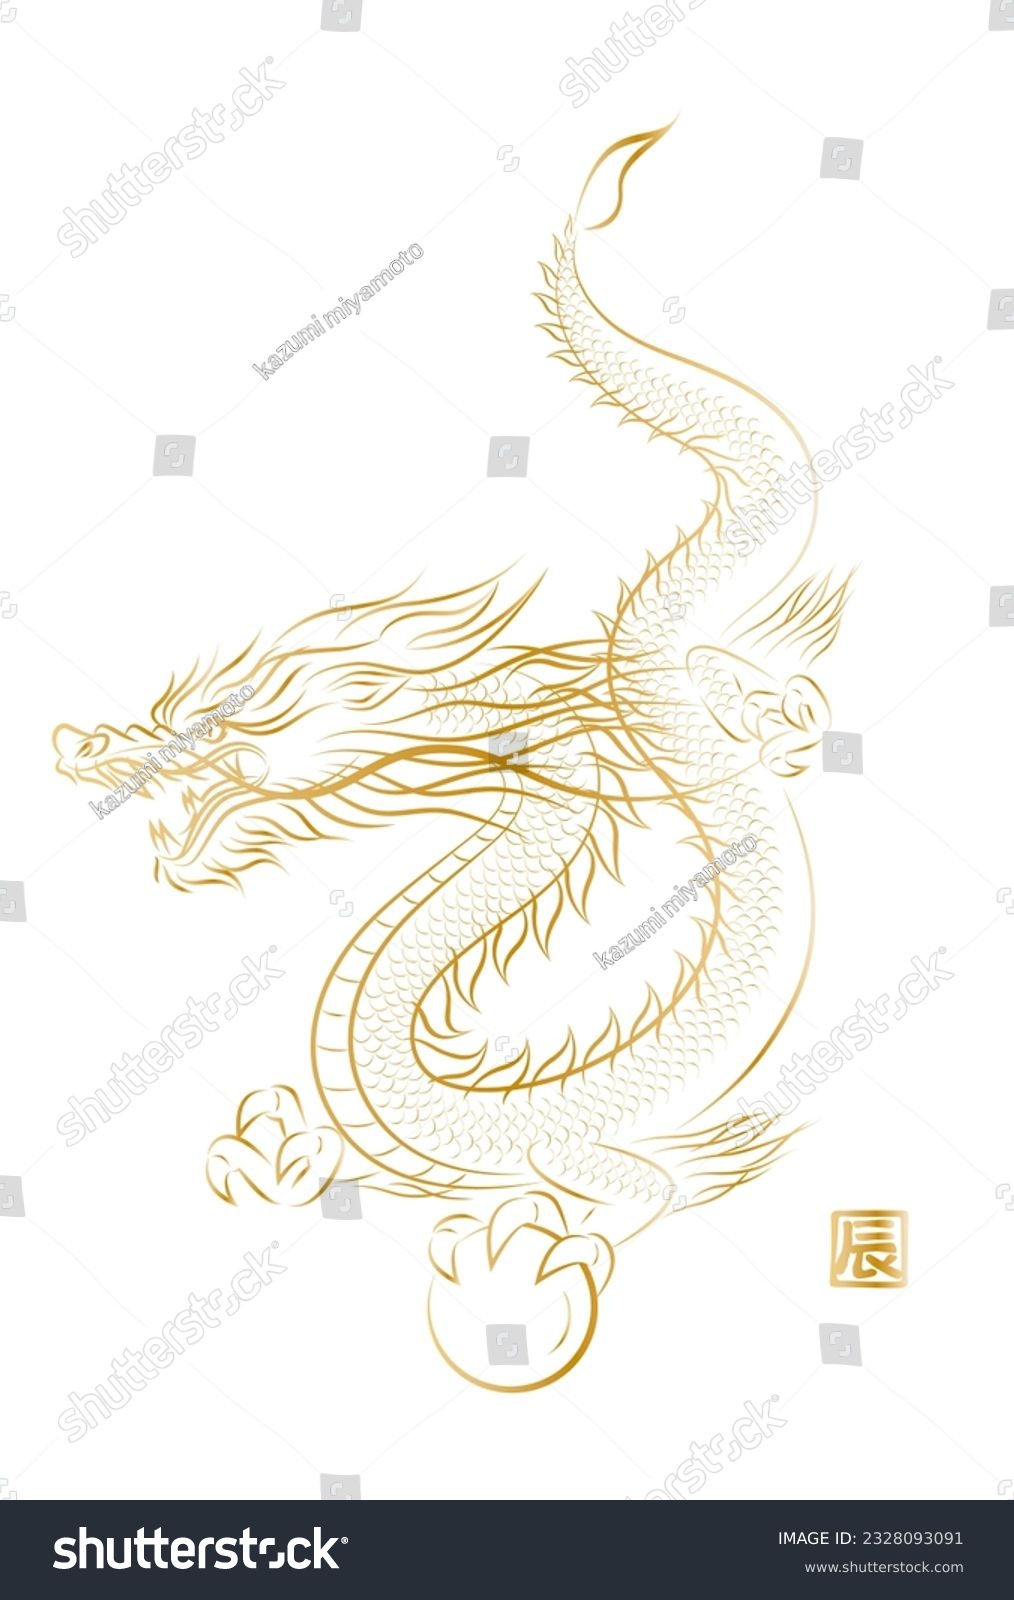 SVG of Illustration of golden dragon flying with dragon ball.  Stylish New Year's card template for the year of the dragon in ink painting style . Vector. 辰 means 